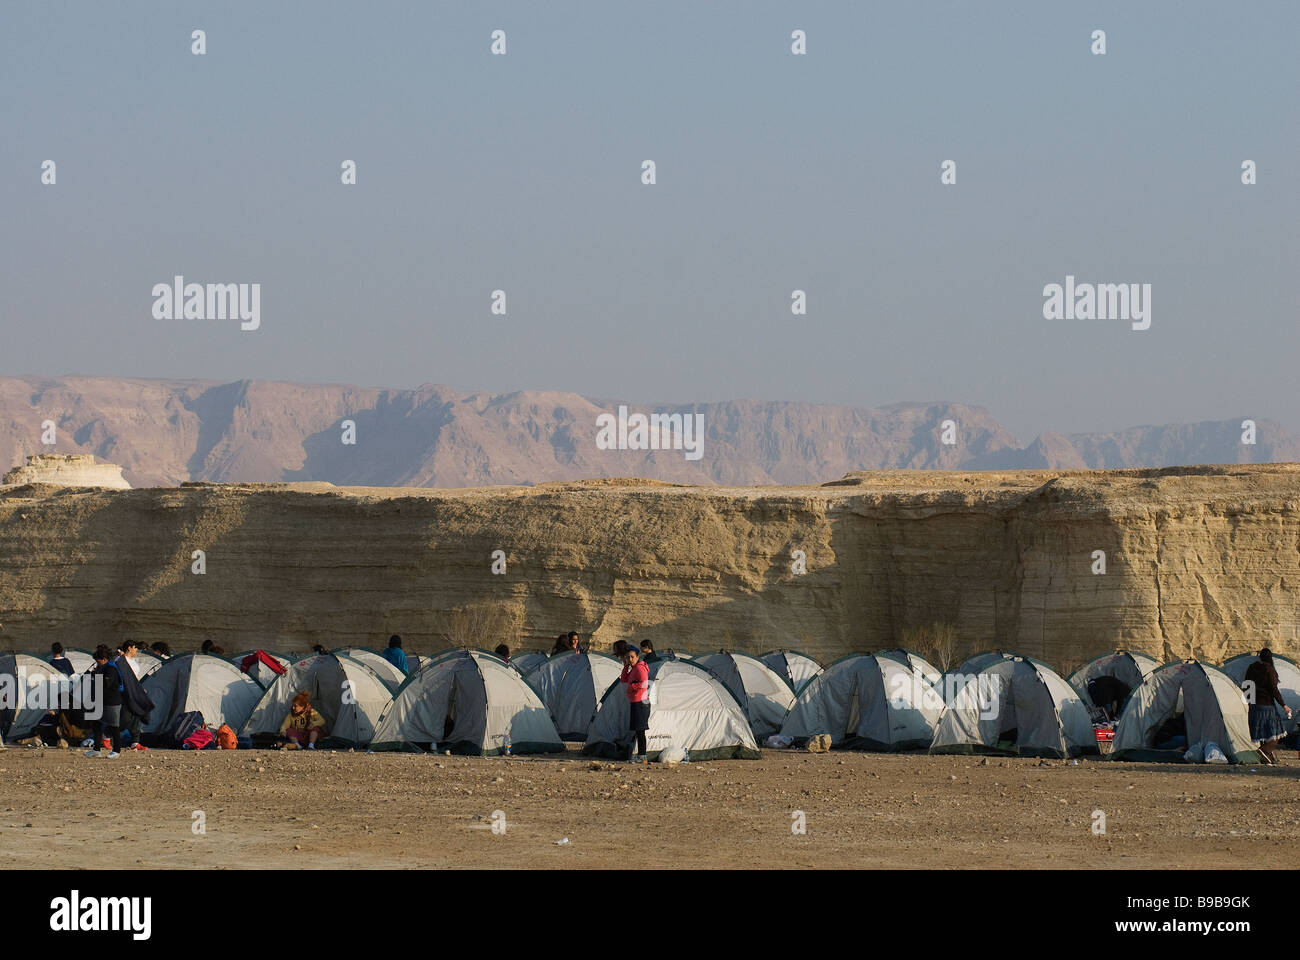 Hikers line up tents in the Judaean or Judean desert near Dead Sea Israel Stock Photo